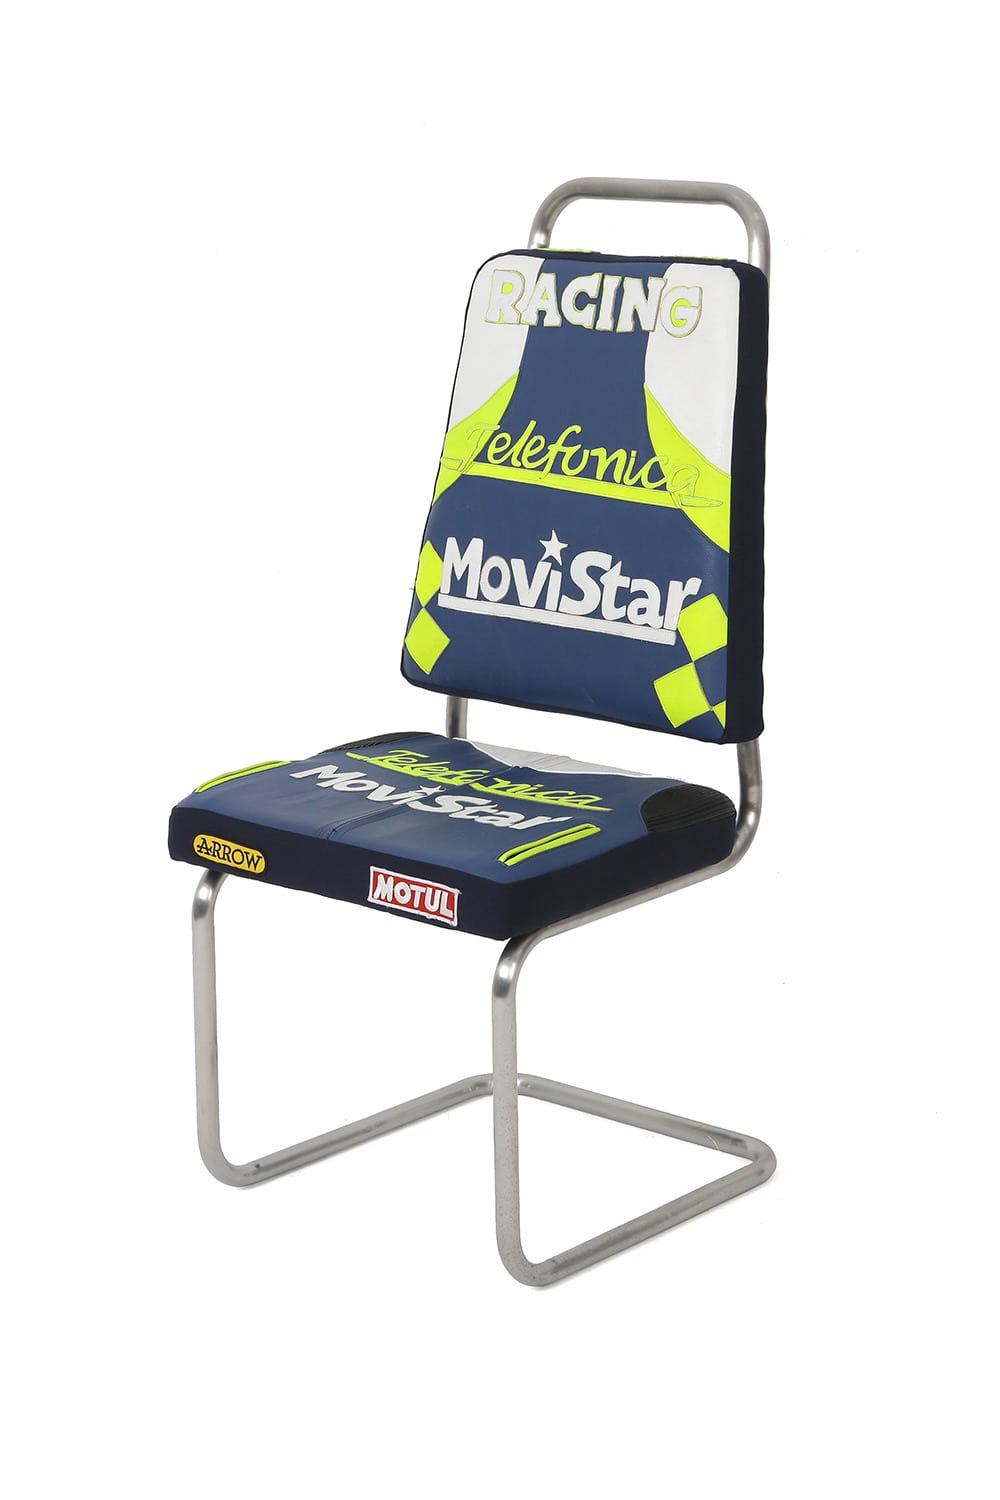 Chair C type 002 - Deconstructed Movistar Racing Jacket Single Chair